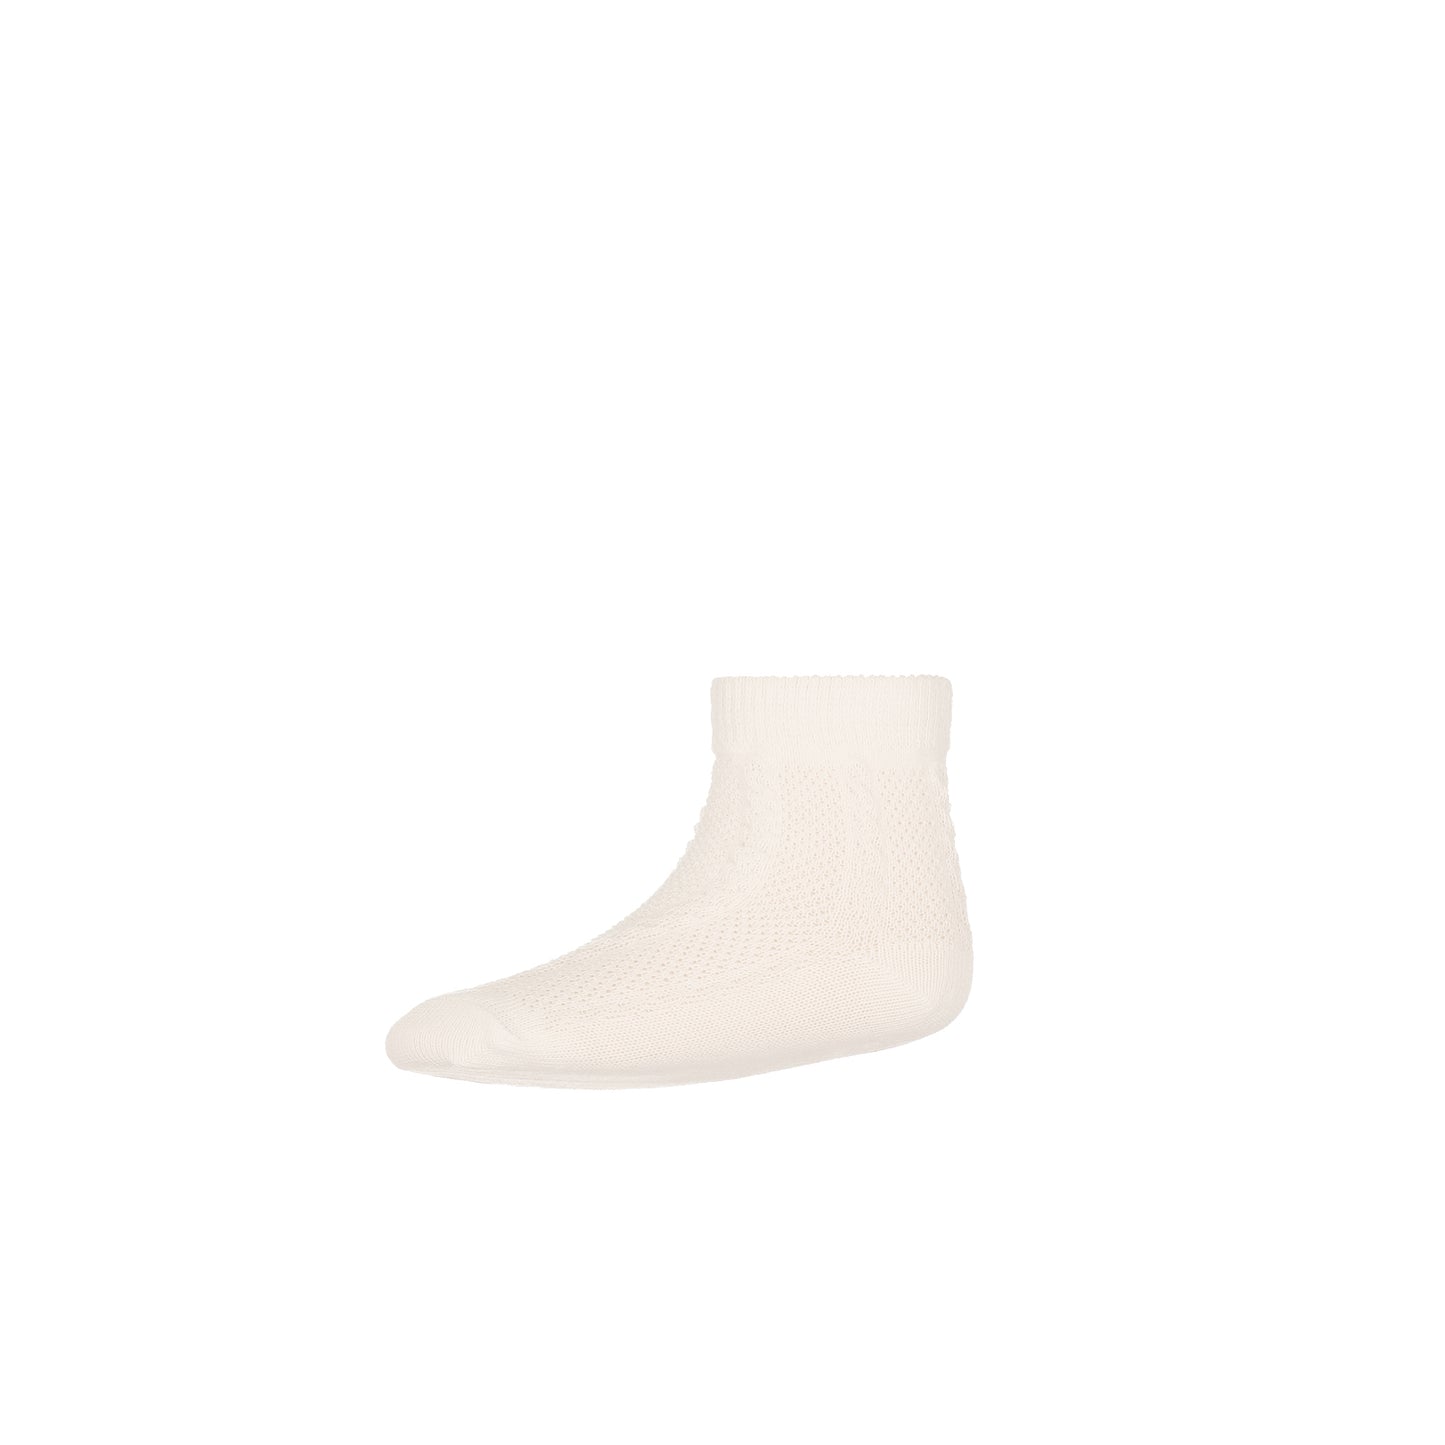 JRP Infant Cable Sock Cream